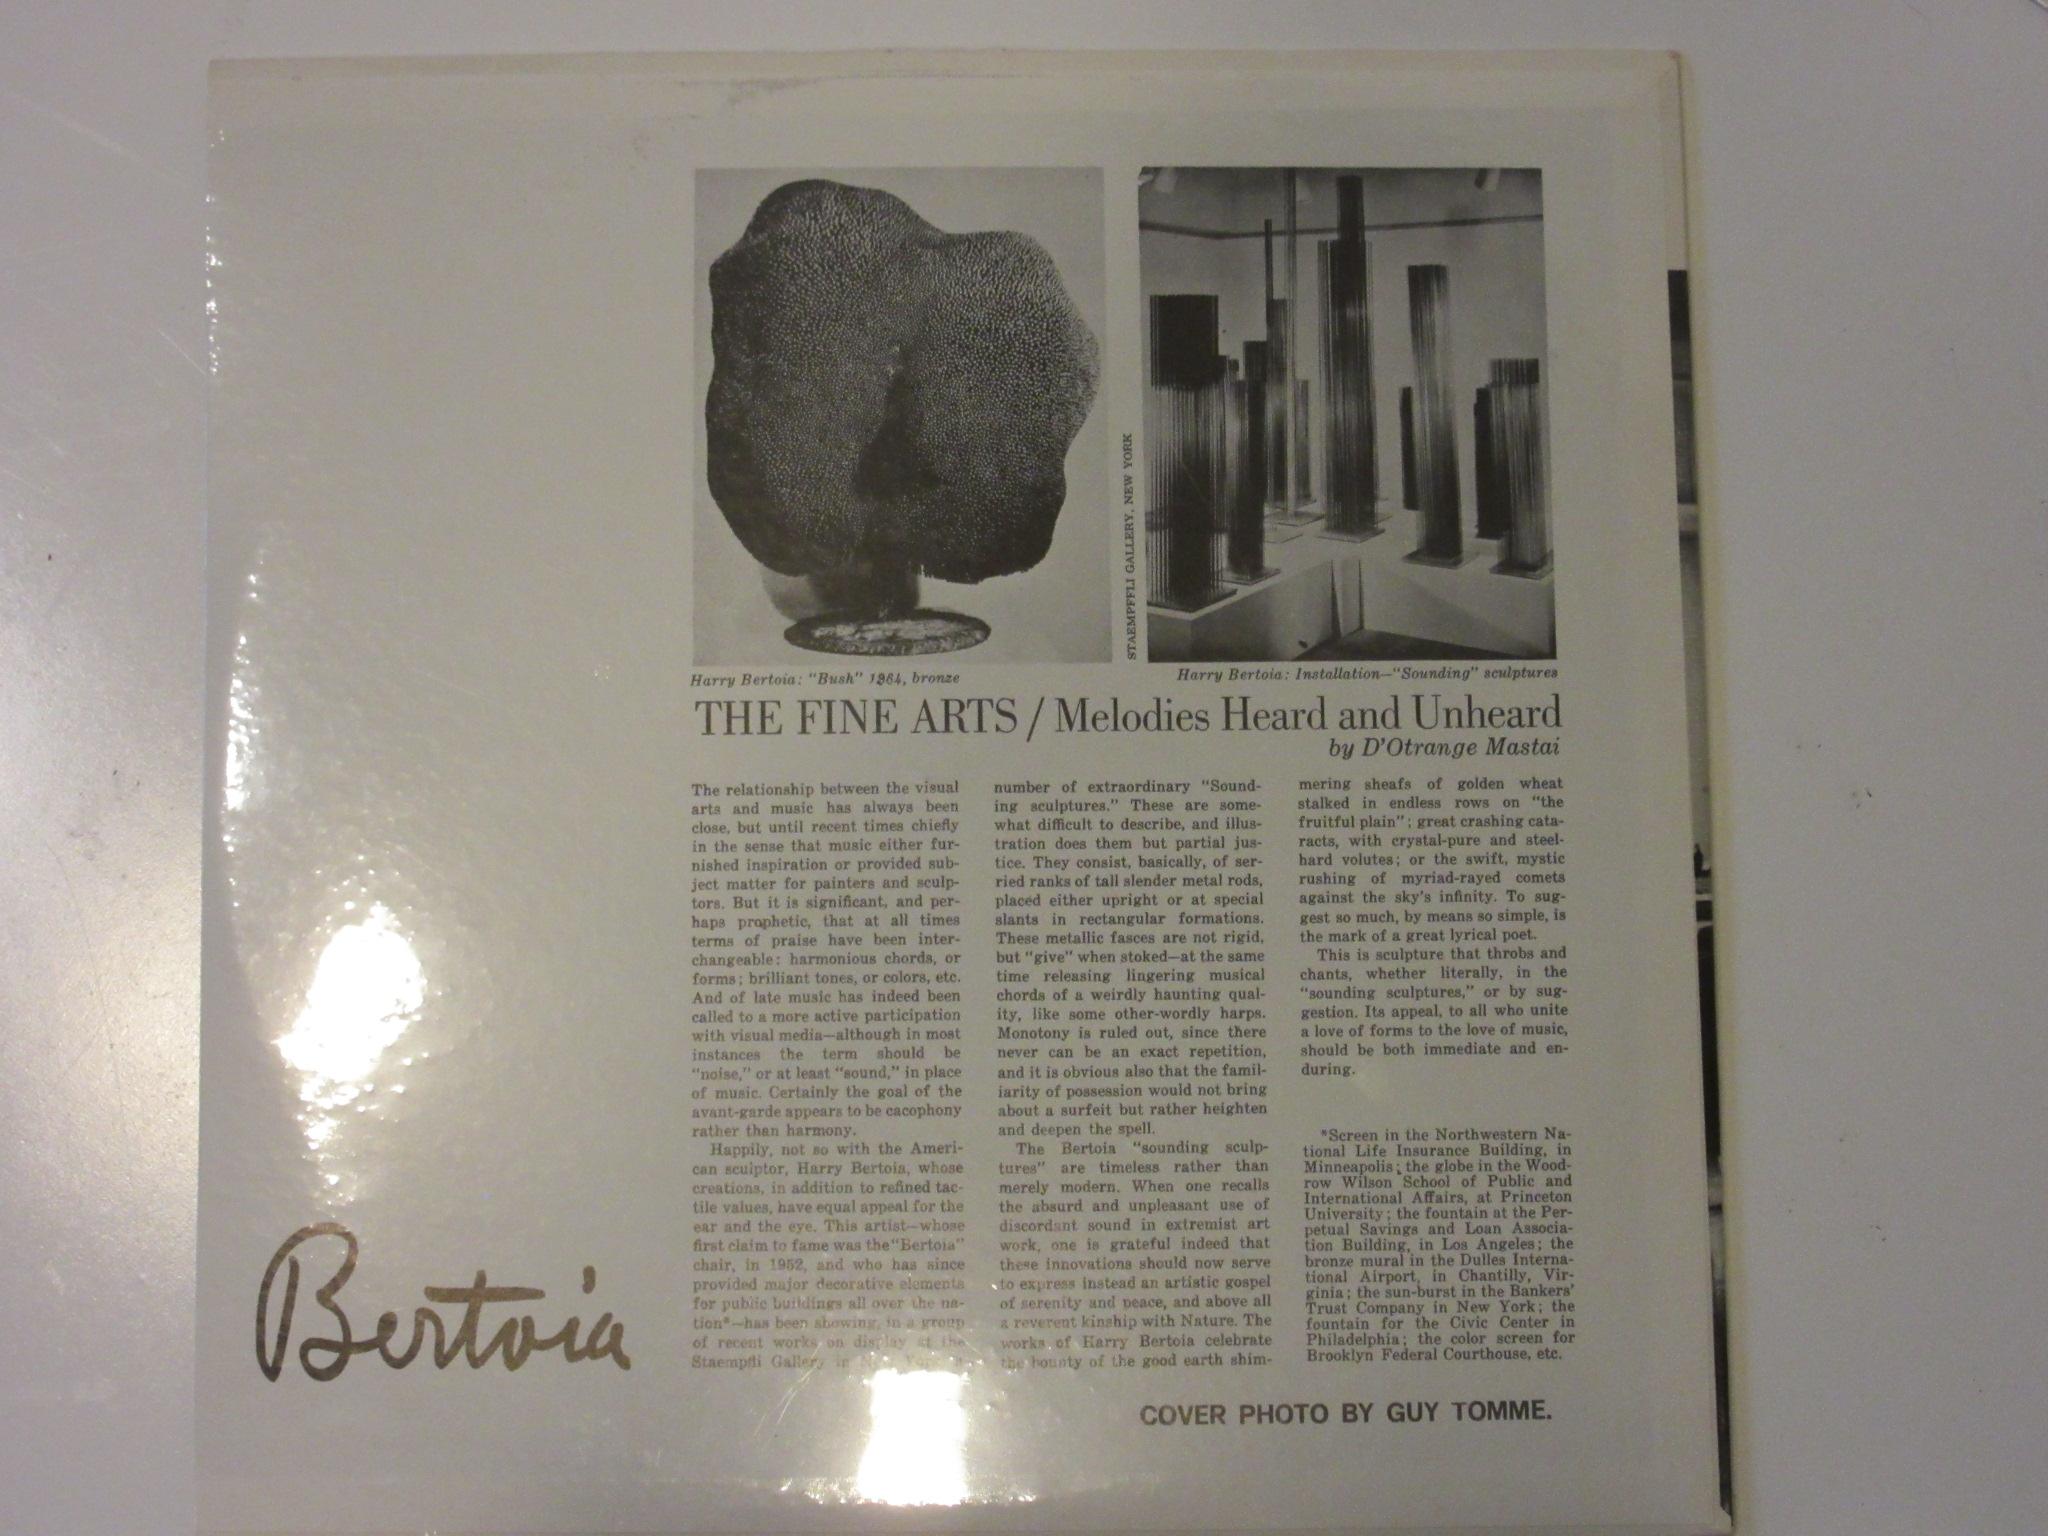 Harry Bertoia Sonambient Sculpture Sound Record Collection 3